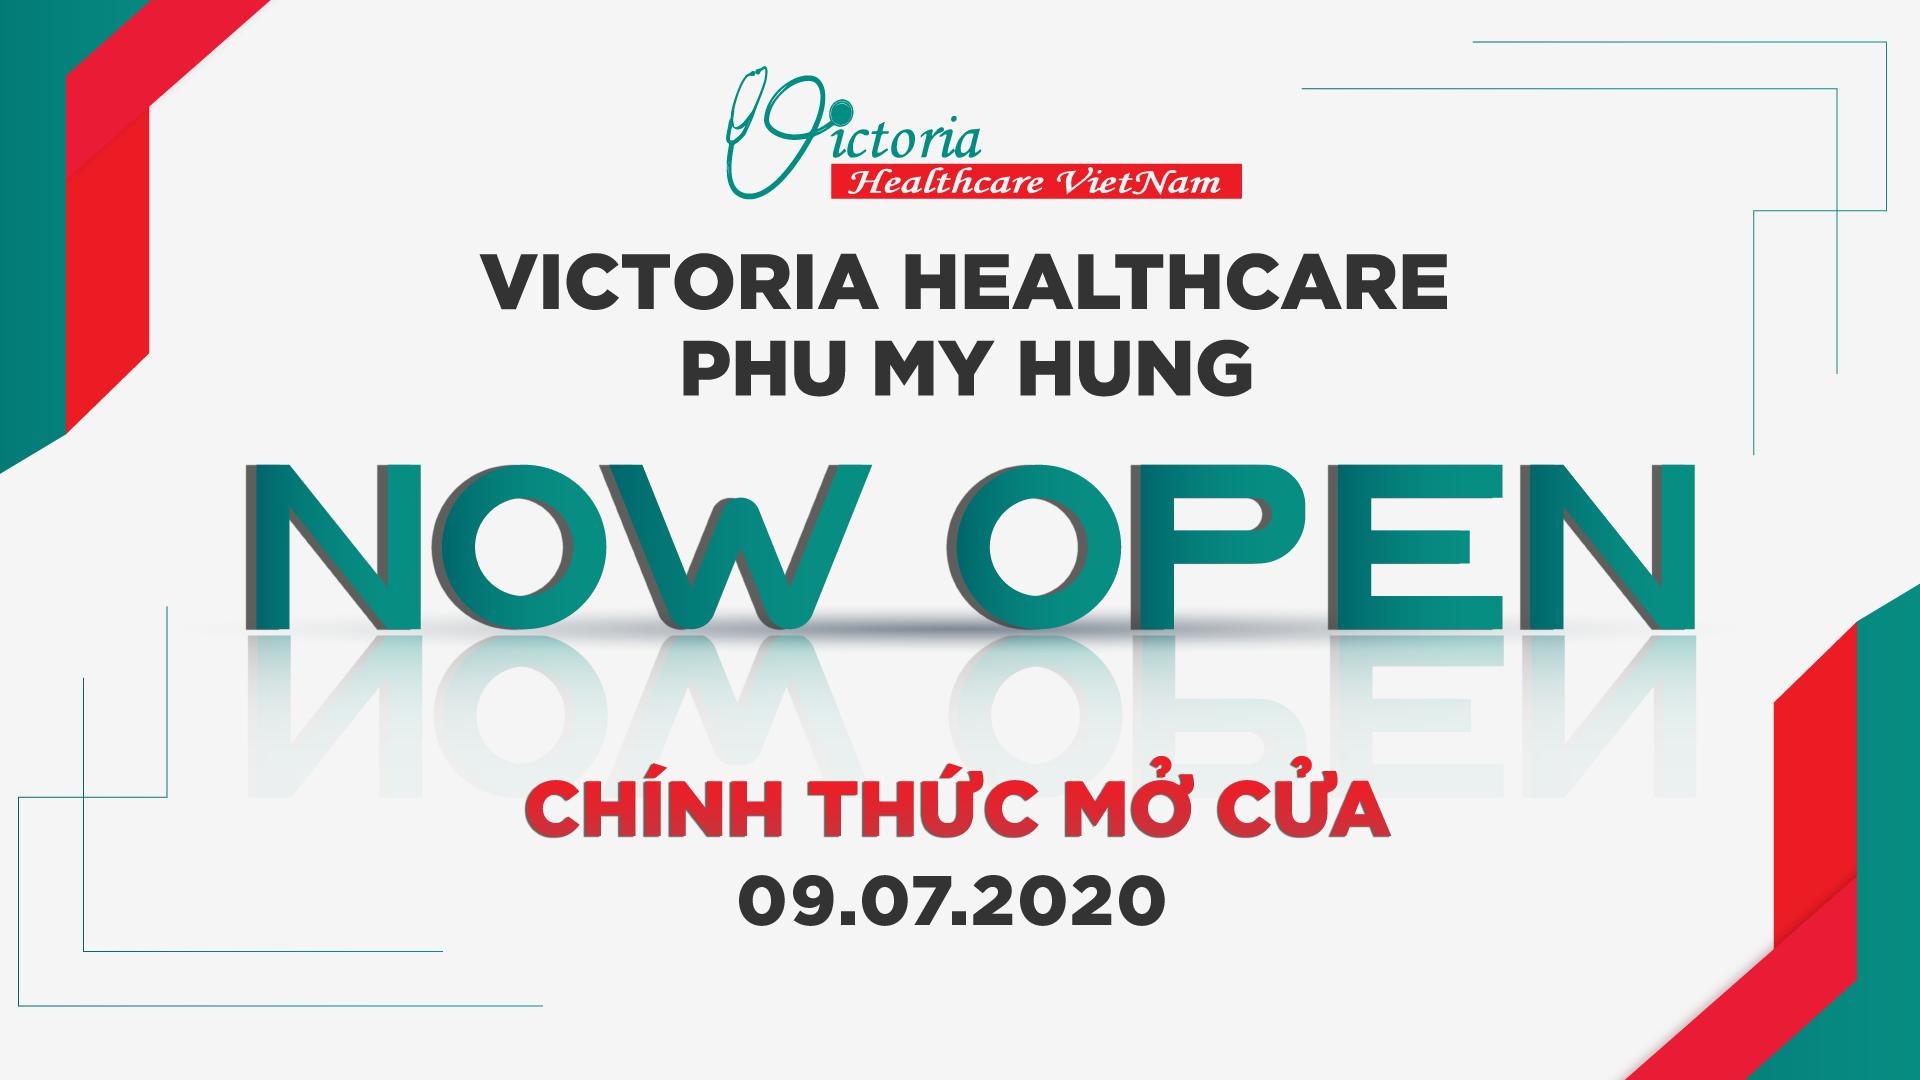 VICTORIA HEALTHCARE PHU MY HUNG CLINIC NOW OPEN